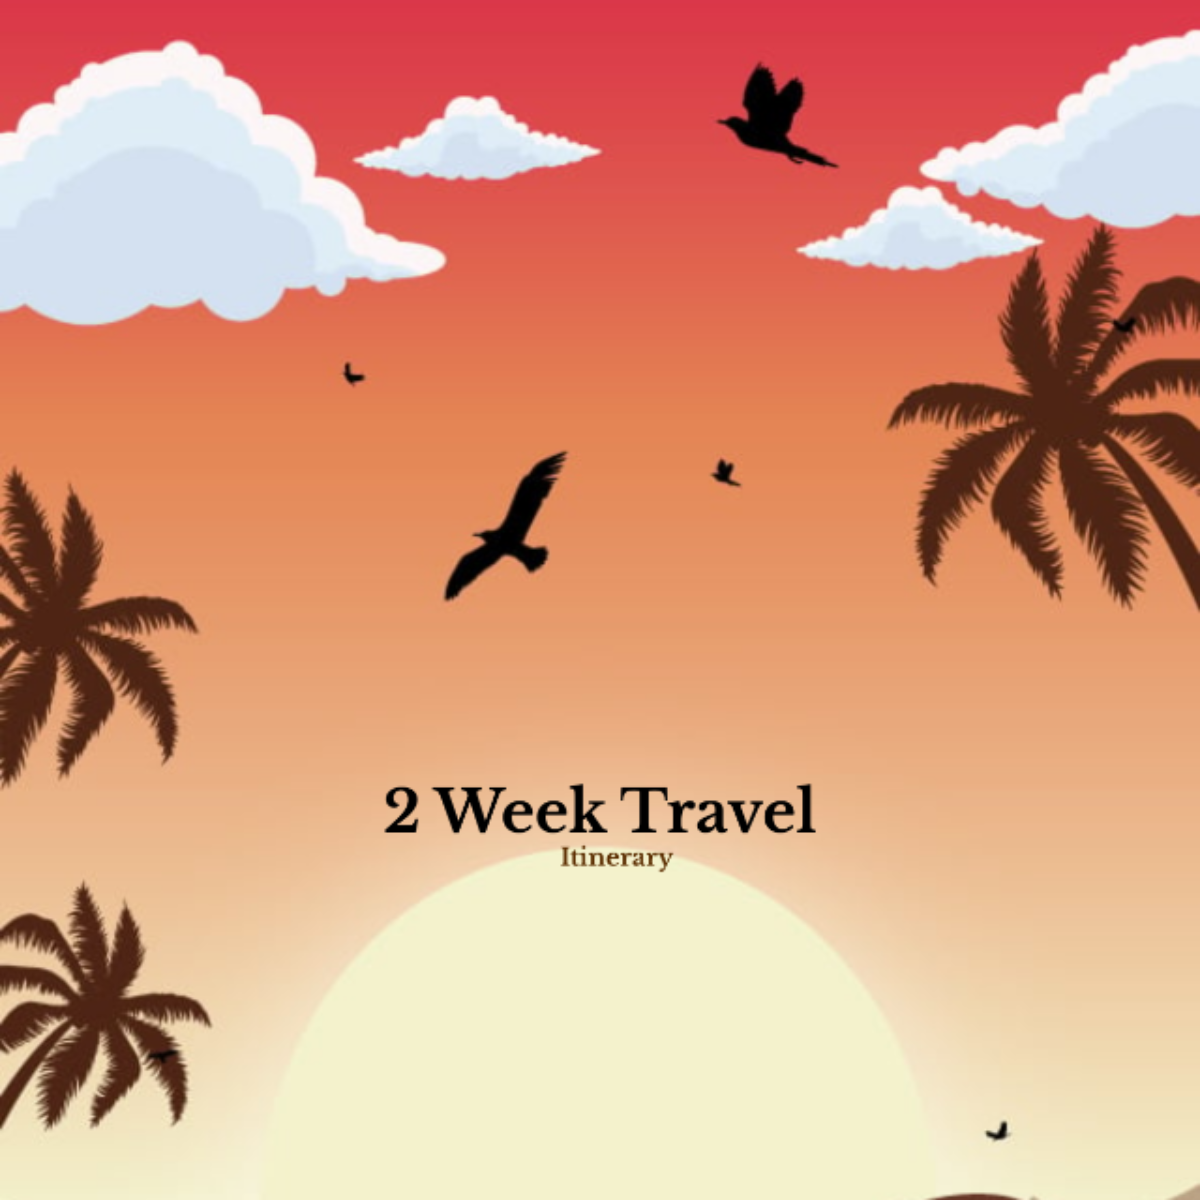 2 Week Travel Itinerary Template